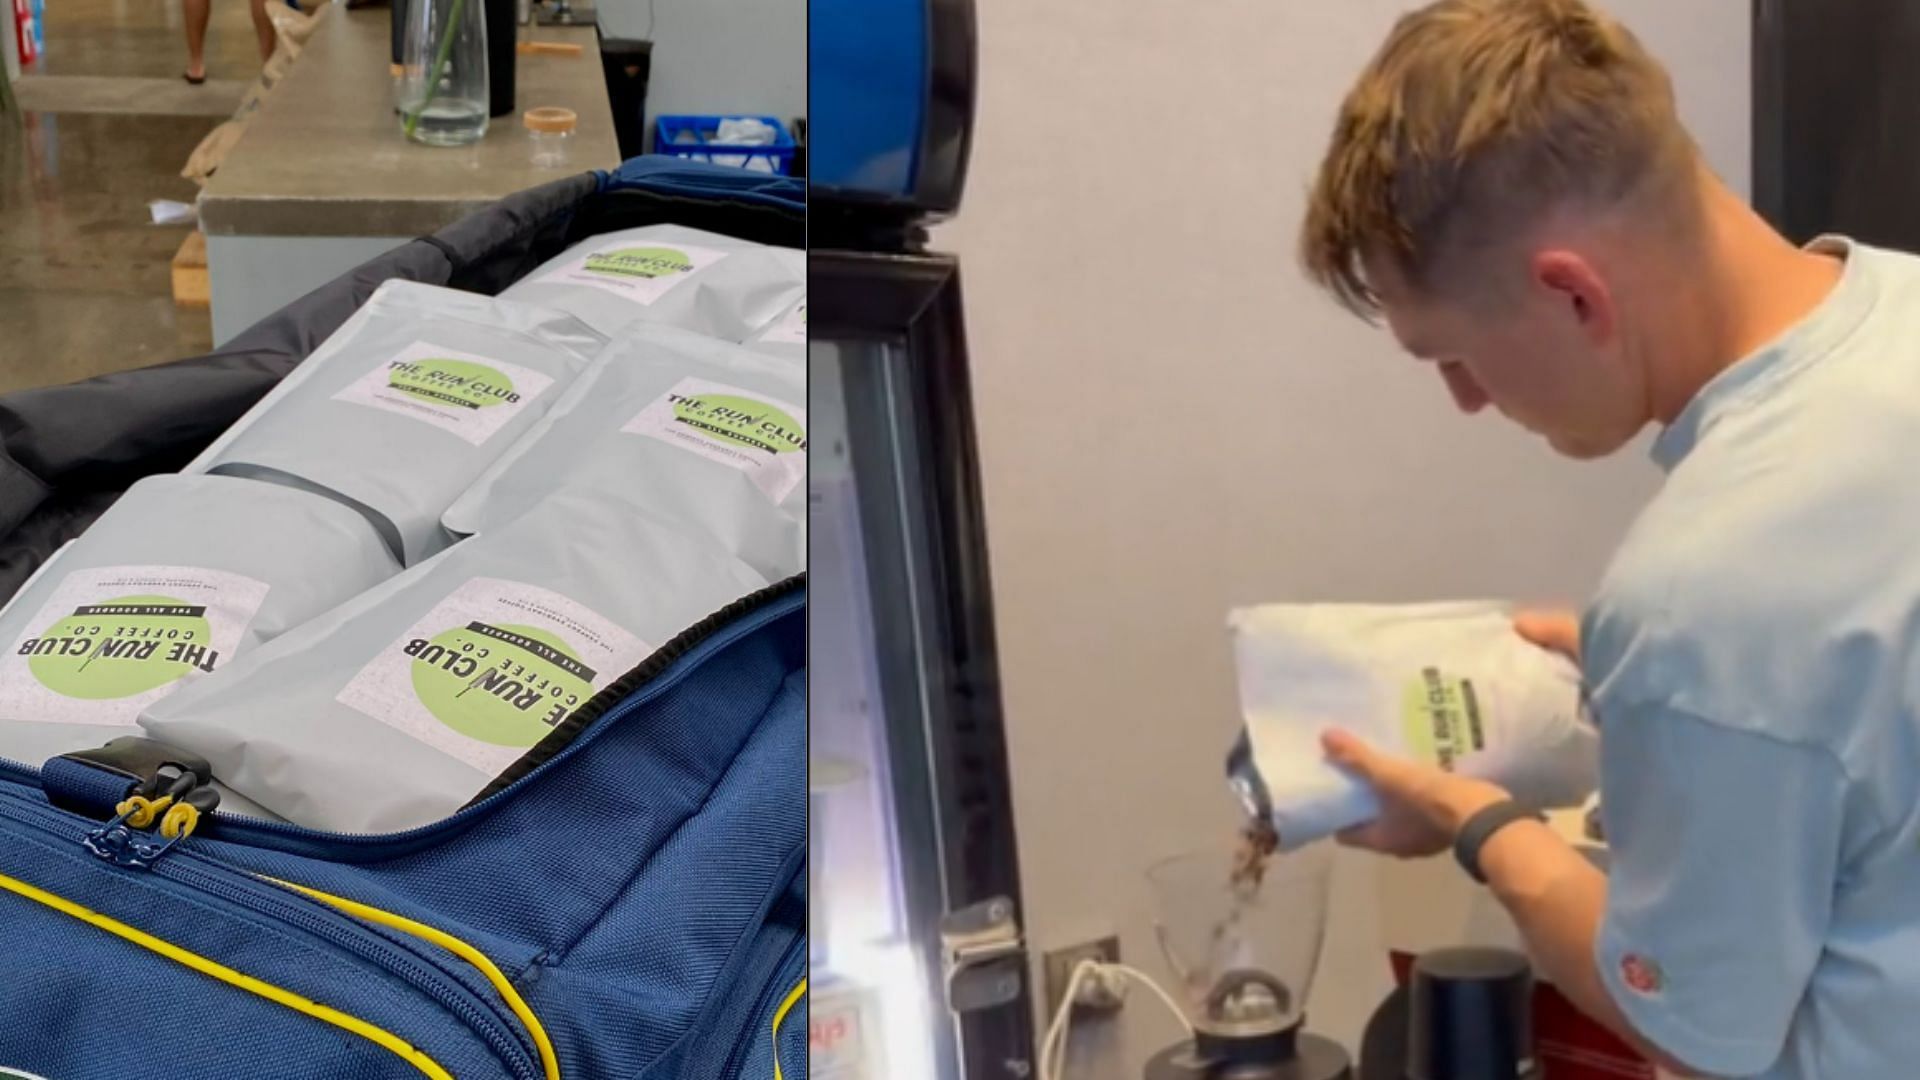 Marnus Labuschagne making his own coffee after reaching India. (P.C.:Twitter)